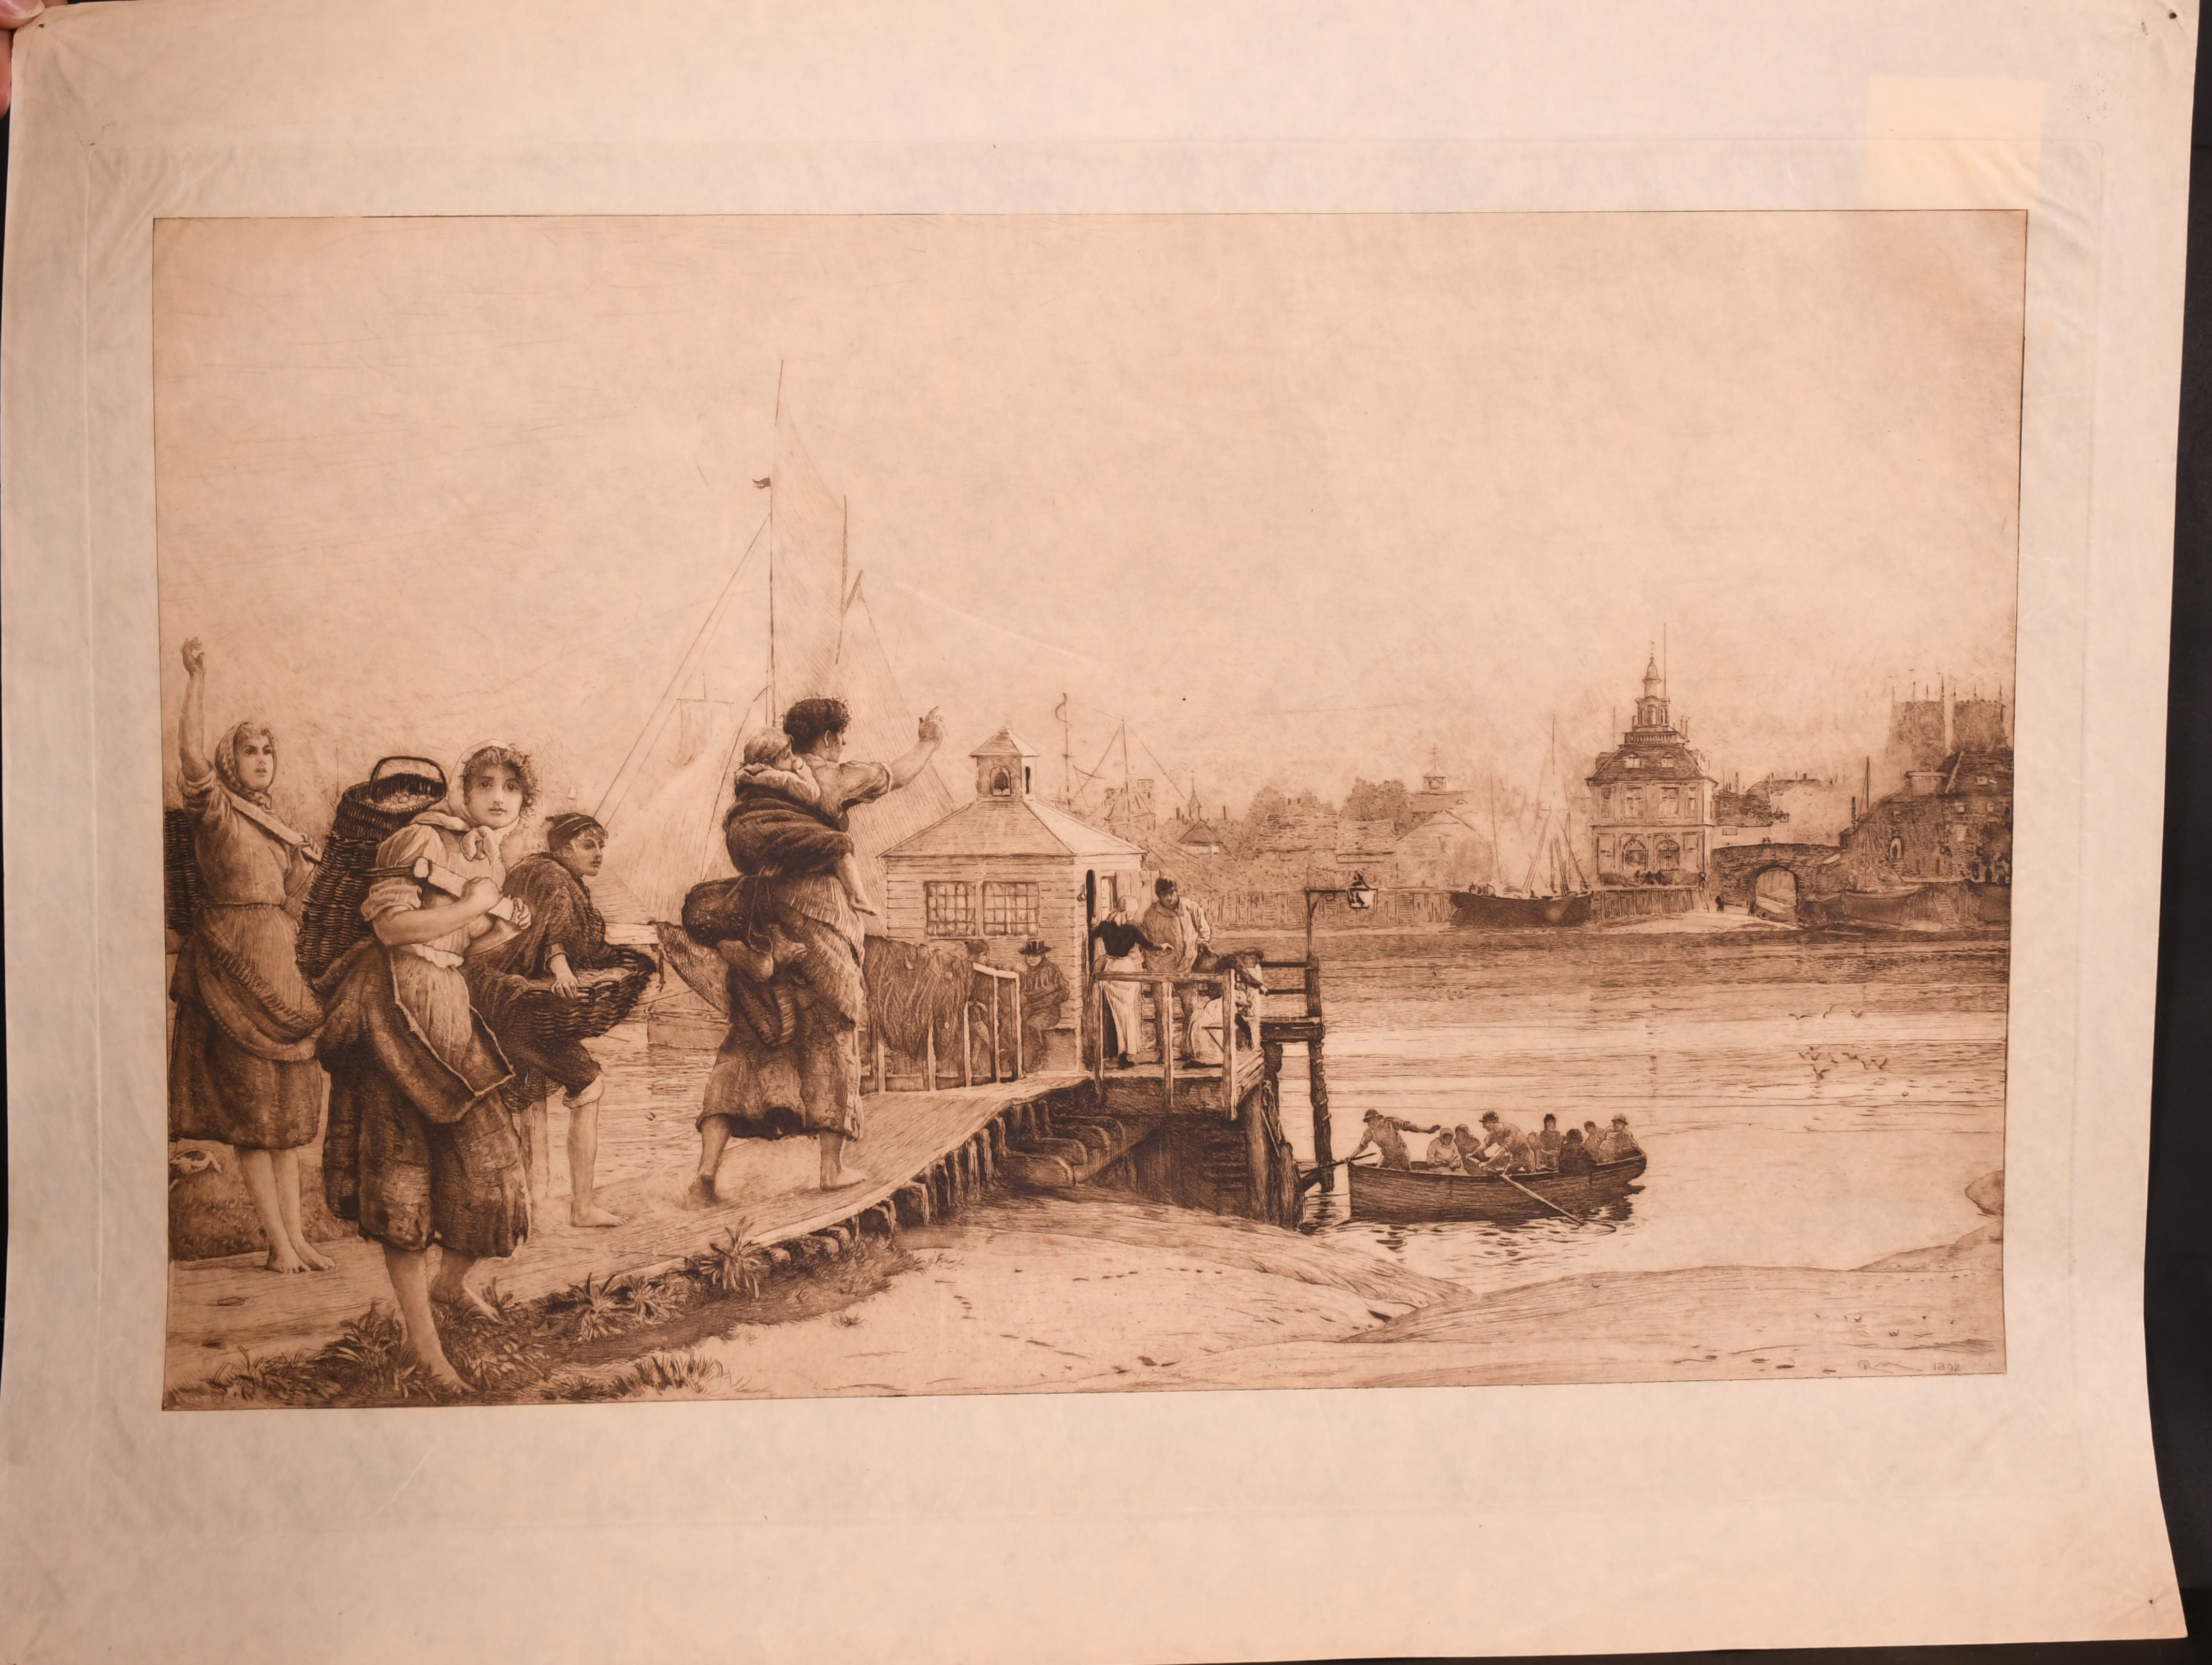 Robert Walker Macbeth (1848-1910) British. “Waiting for the Ferry”, Engraving, Unframed, 13.75” x - Image 2 of 4